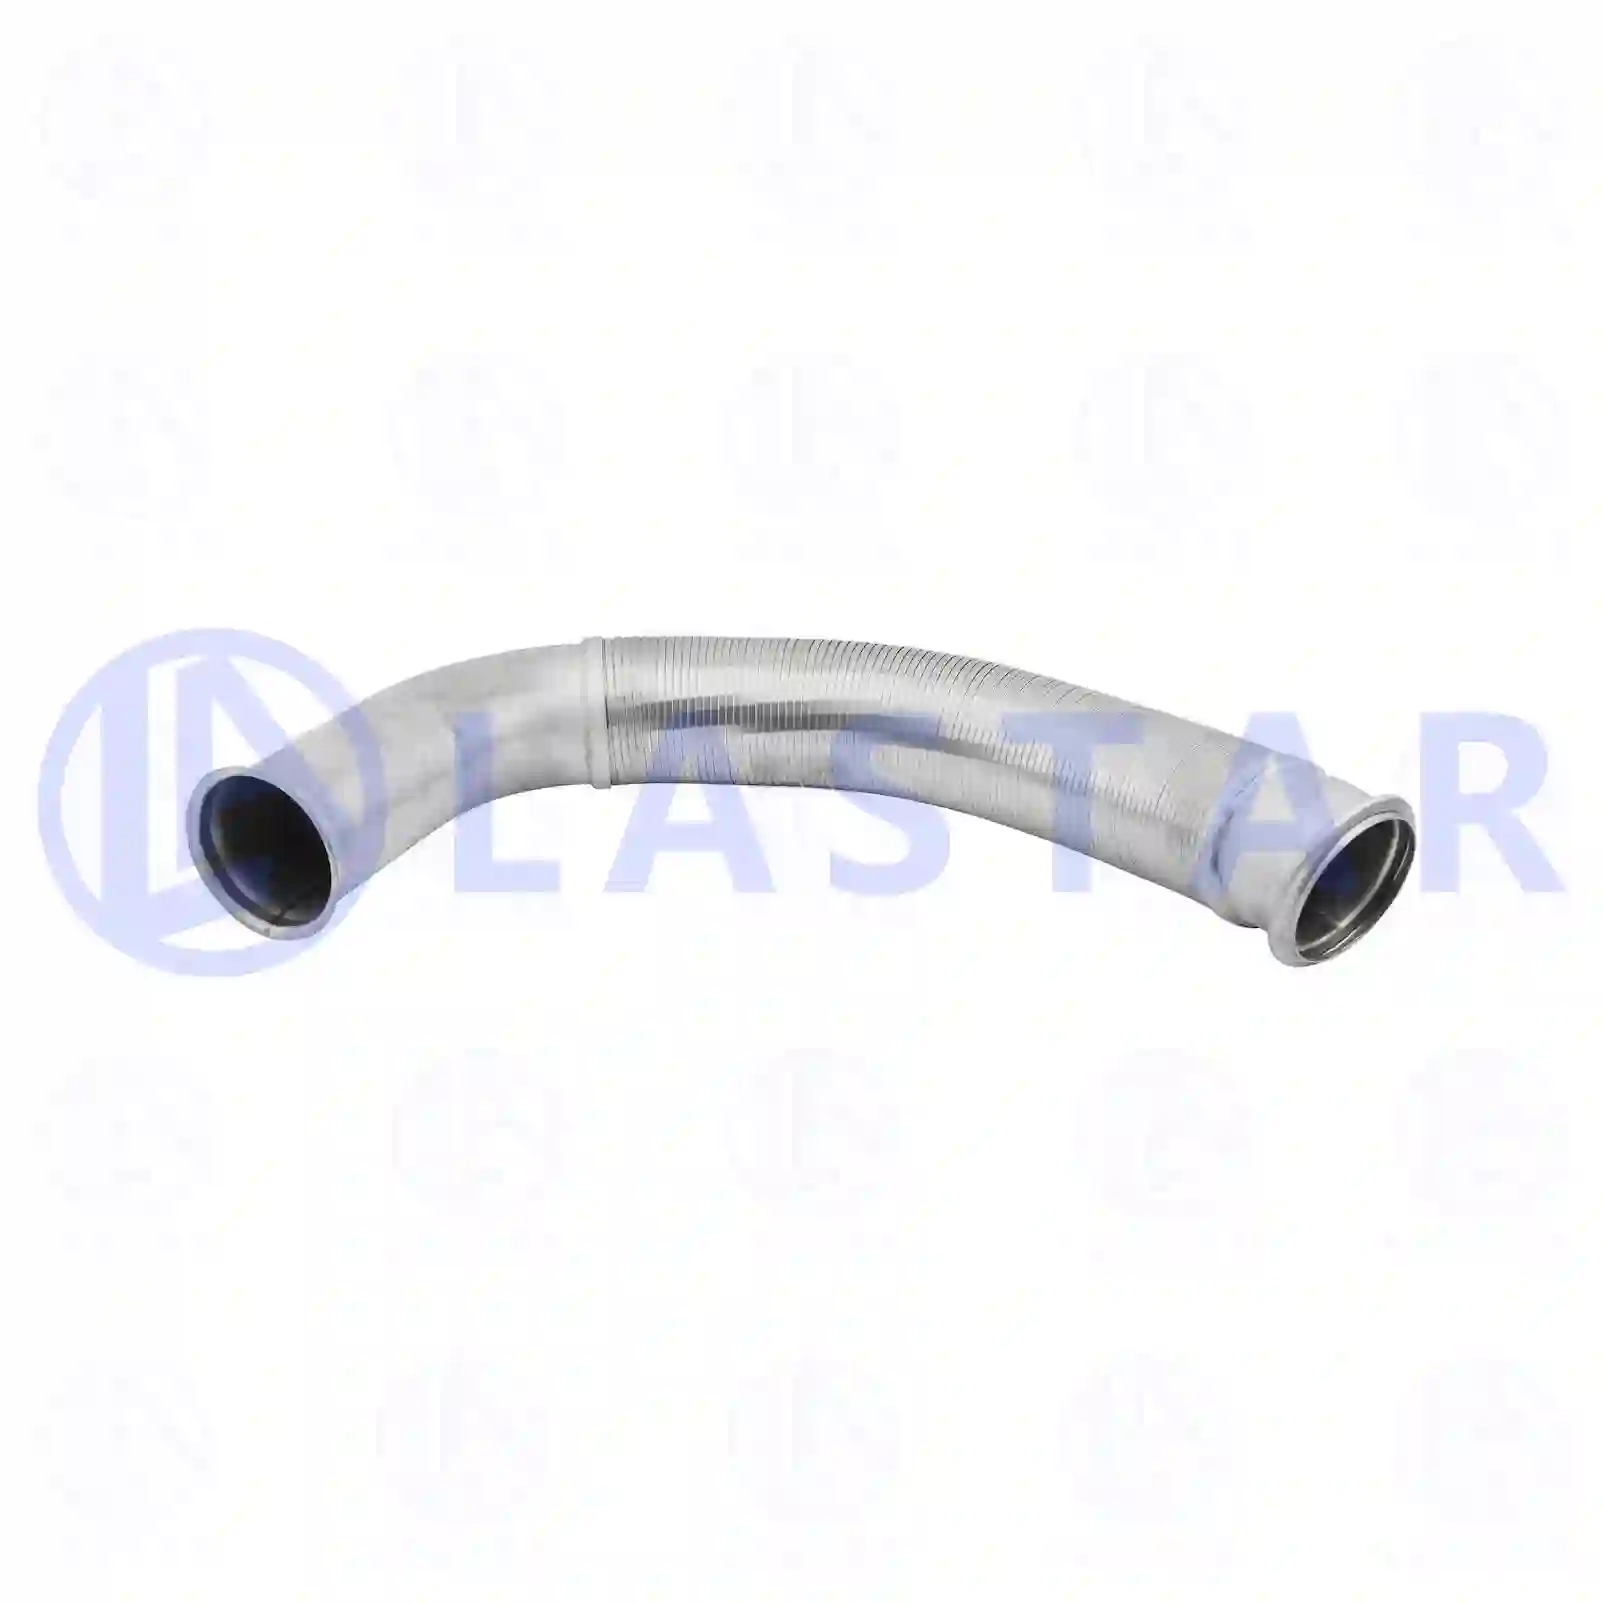 Front exhaust pipe, 77706491, 1349555, 1428368 ||  77706491 Lastar Spare Part | Truck Spare Parts, Auotomotive Spare Parts Front exhaust pipe, 77706491, 1349555, 1428368 ||  77706491 Lastar Spare Part | Truck Spare Parts, Auotomotive Spare Parts